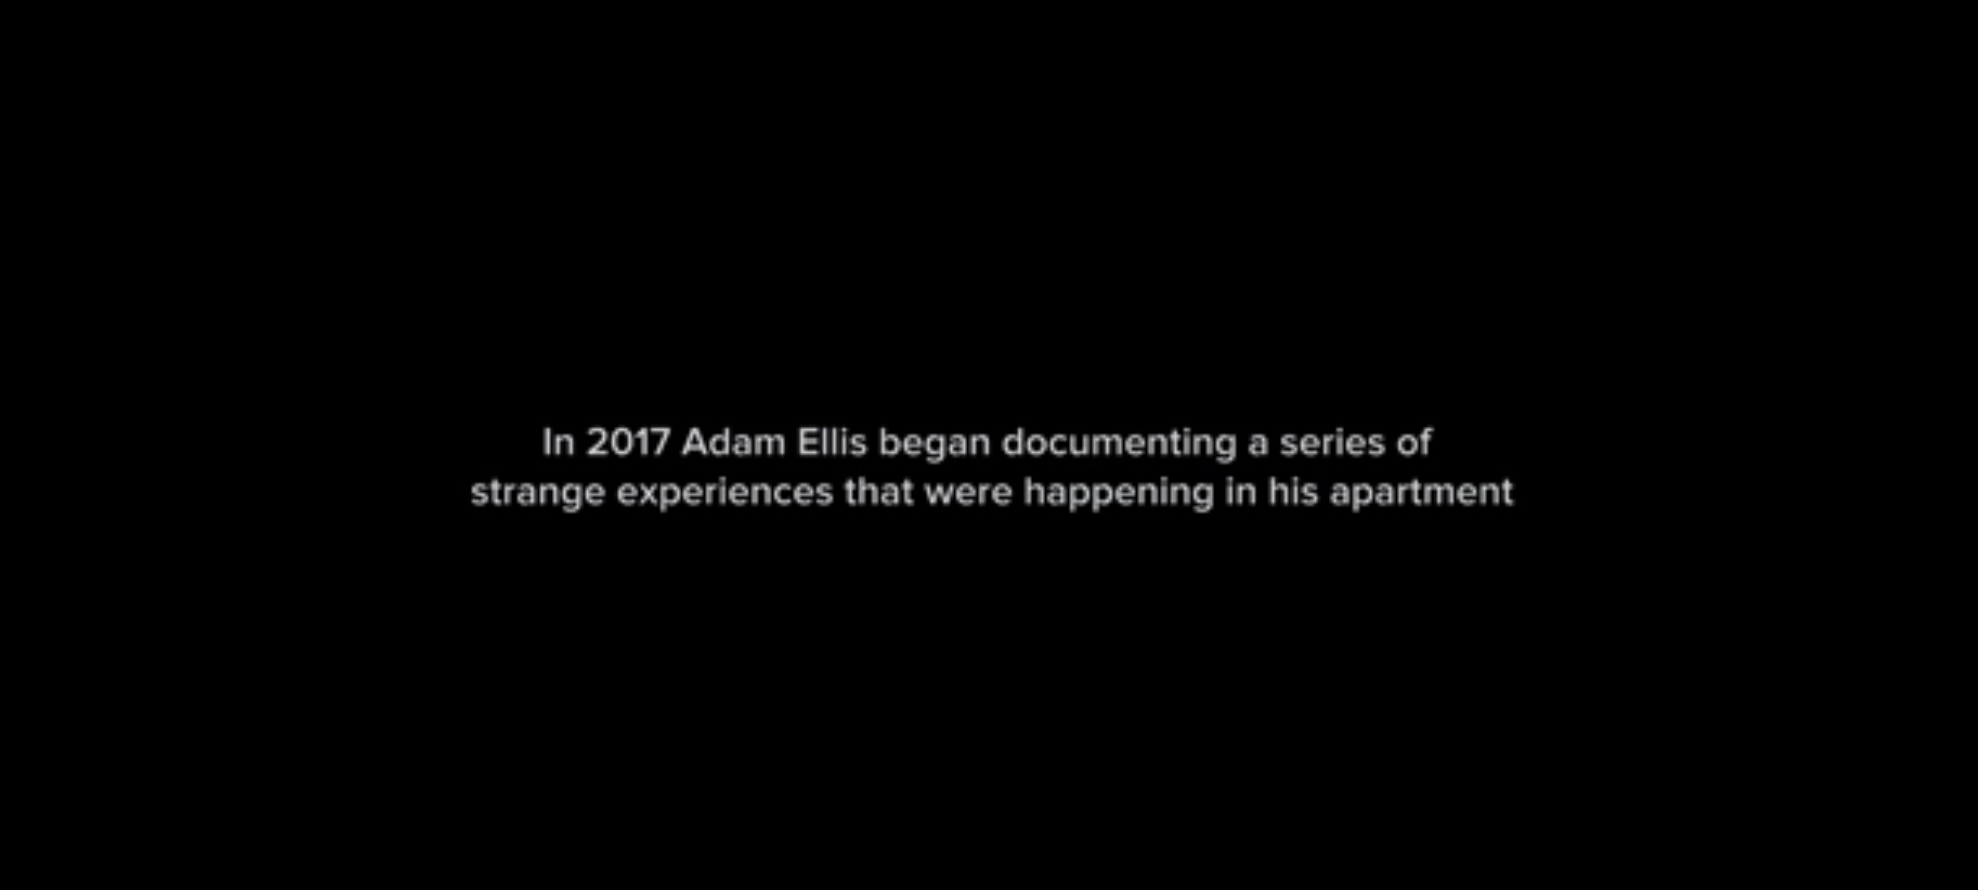 On the screen: &quot;In 2017 Adam Ellis began documenting a series of strange experiences that were happening in his apartment&quot;